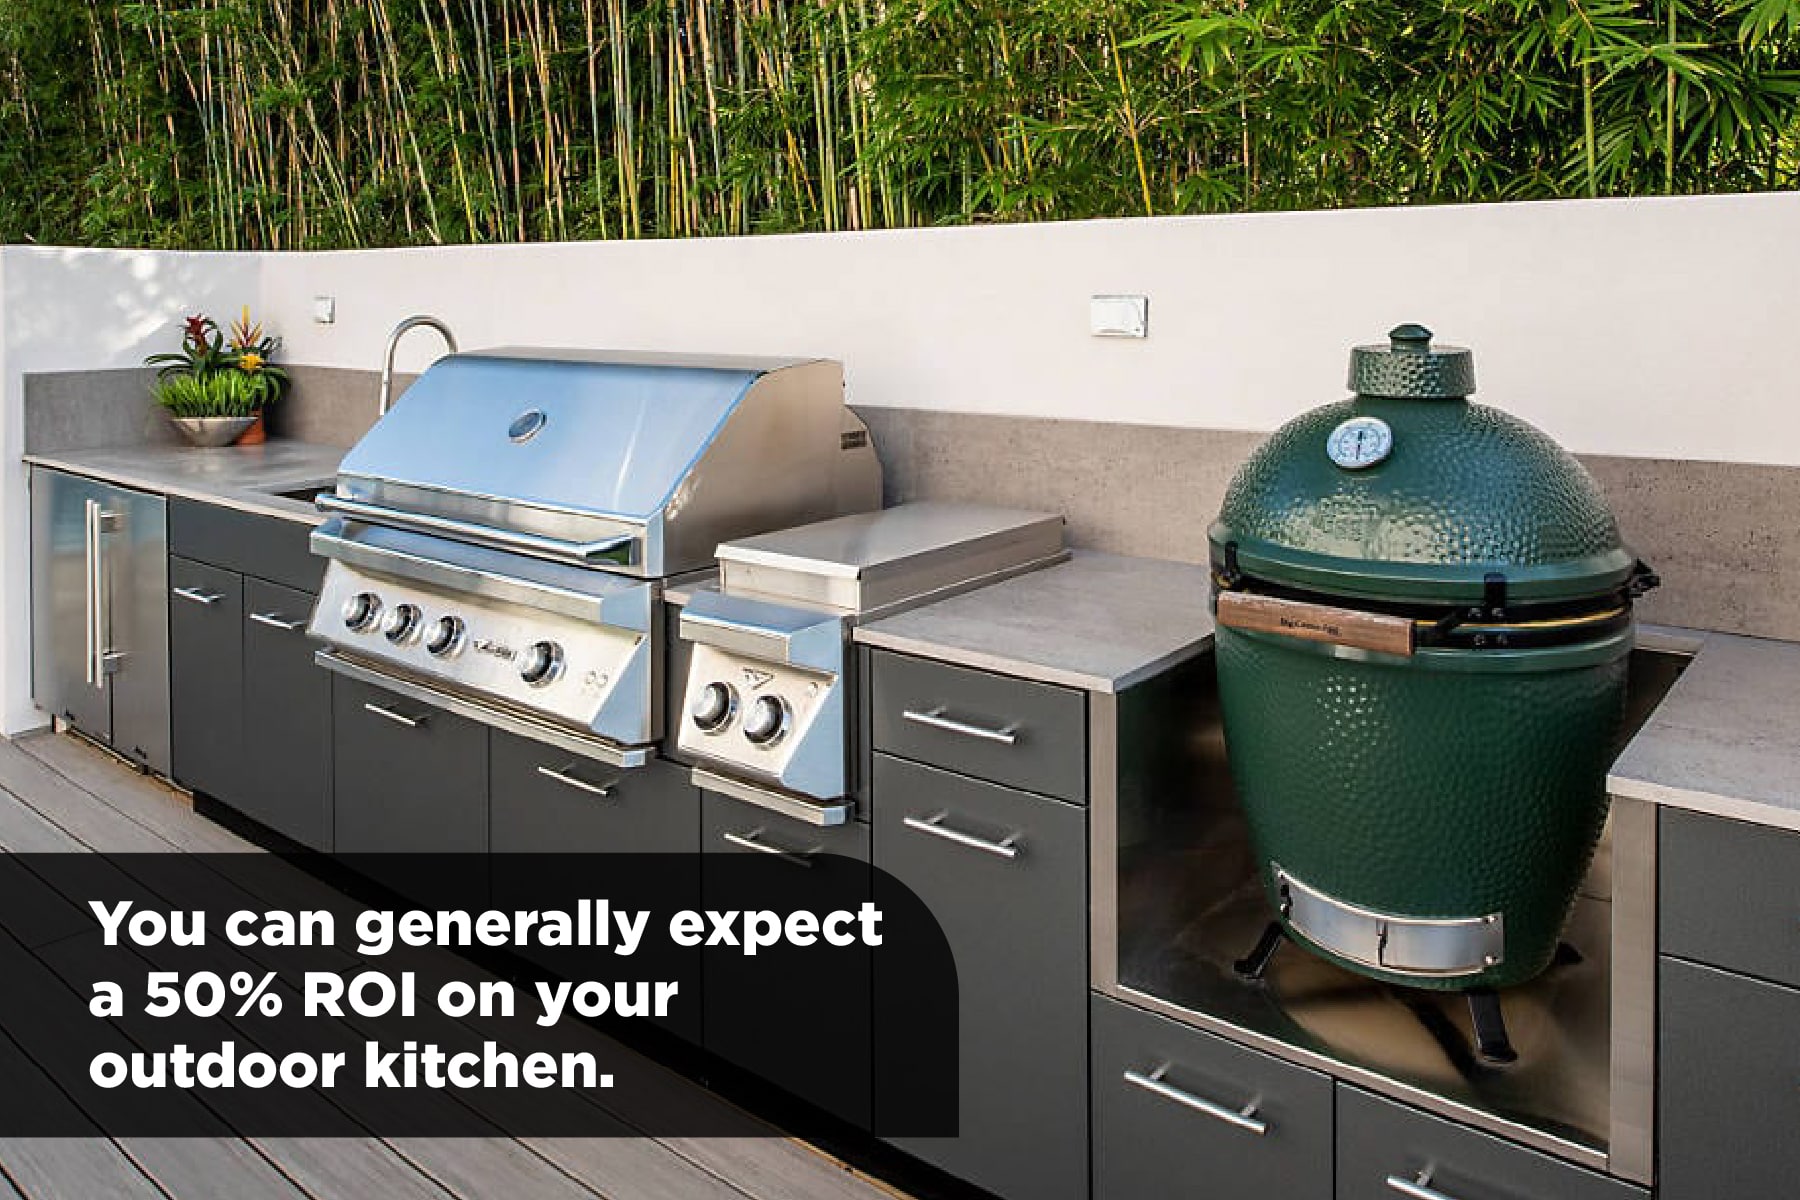 you can get a good ROI on outdoor kitchens